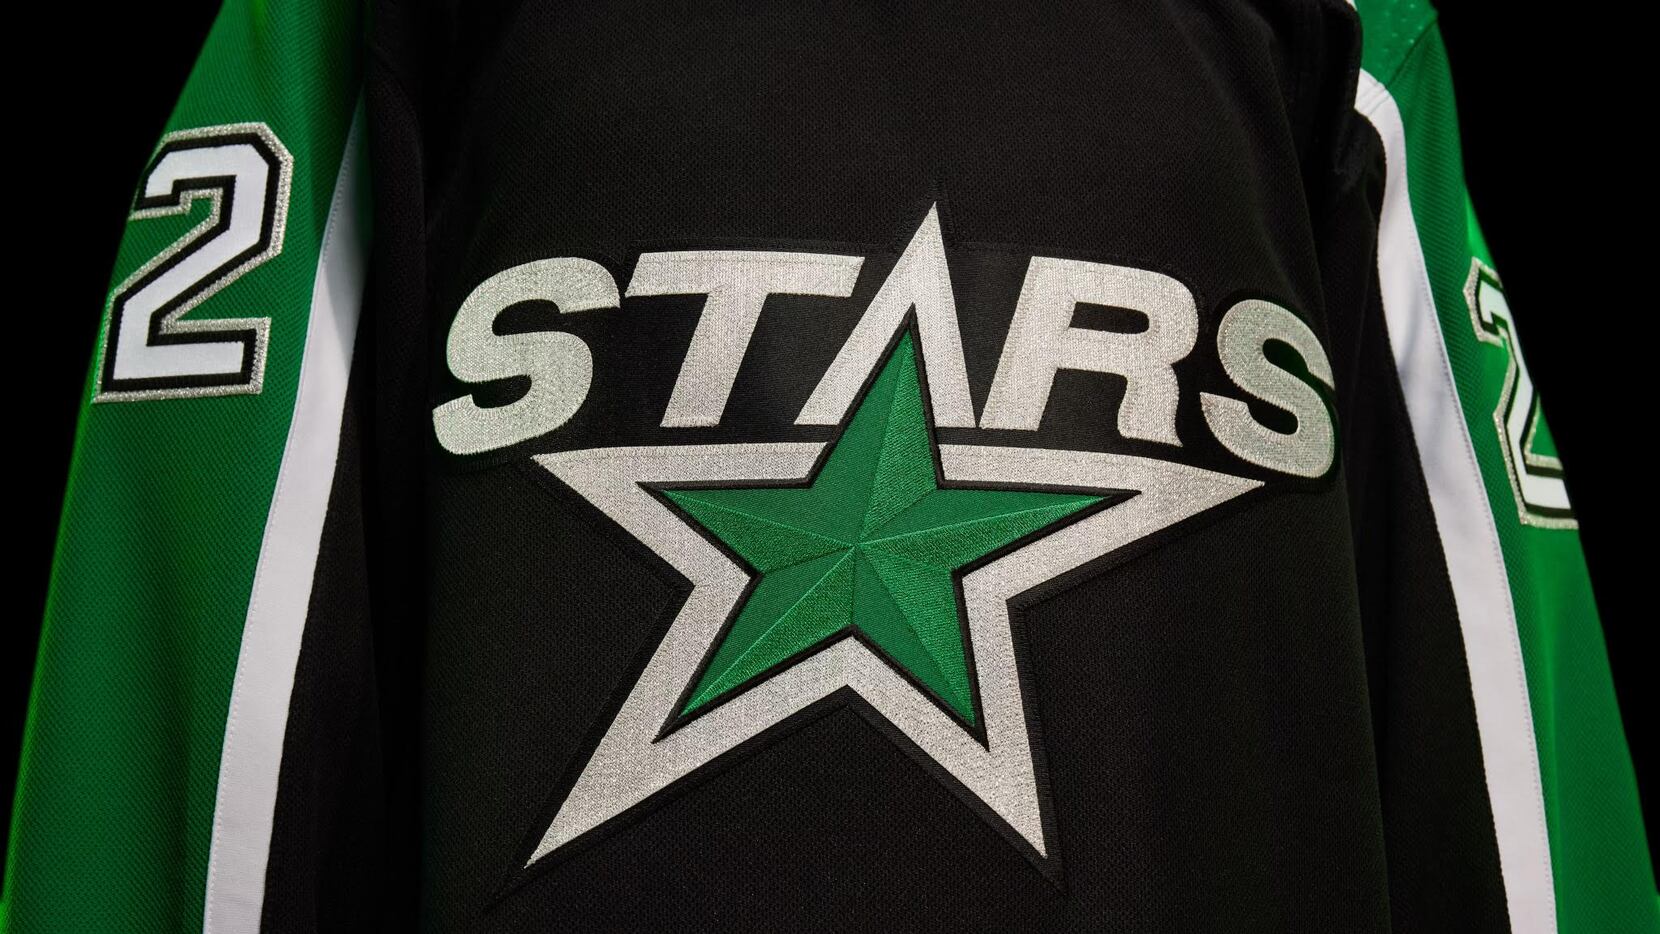 Dallas Stars fans need to check out these new 'Reverse Retro' jerseys